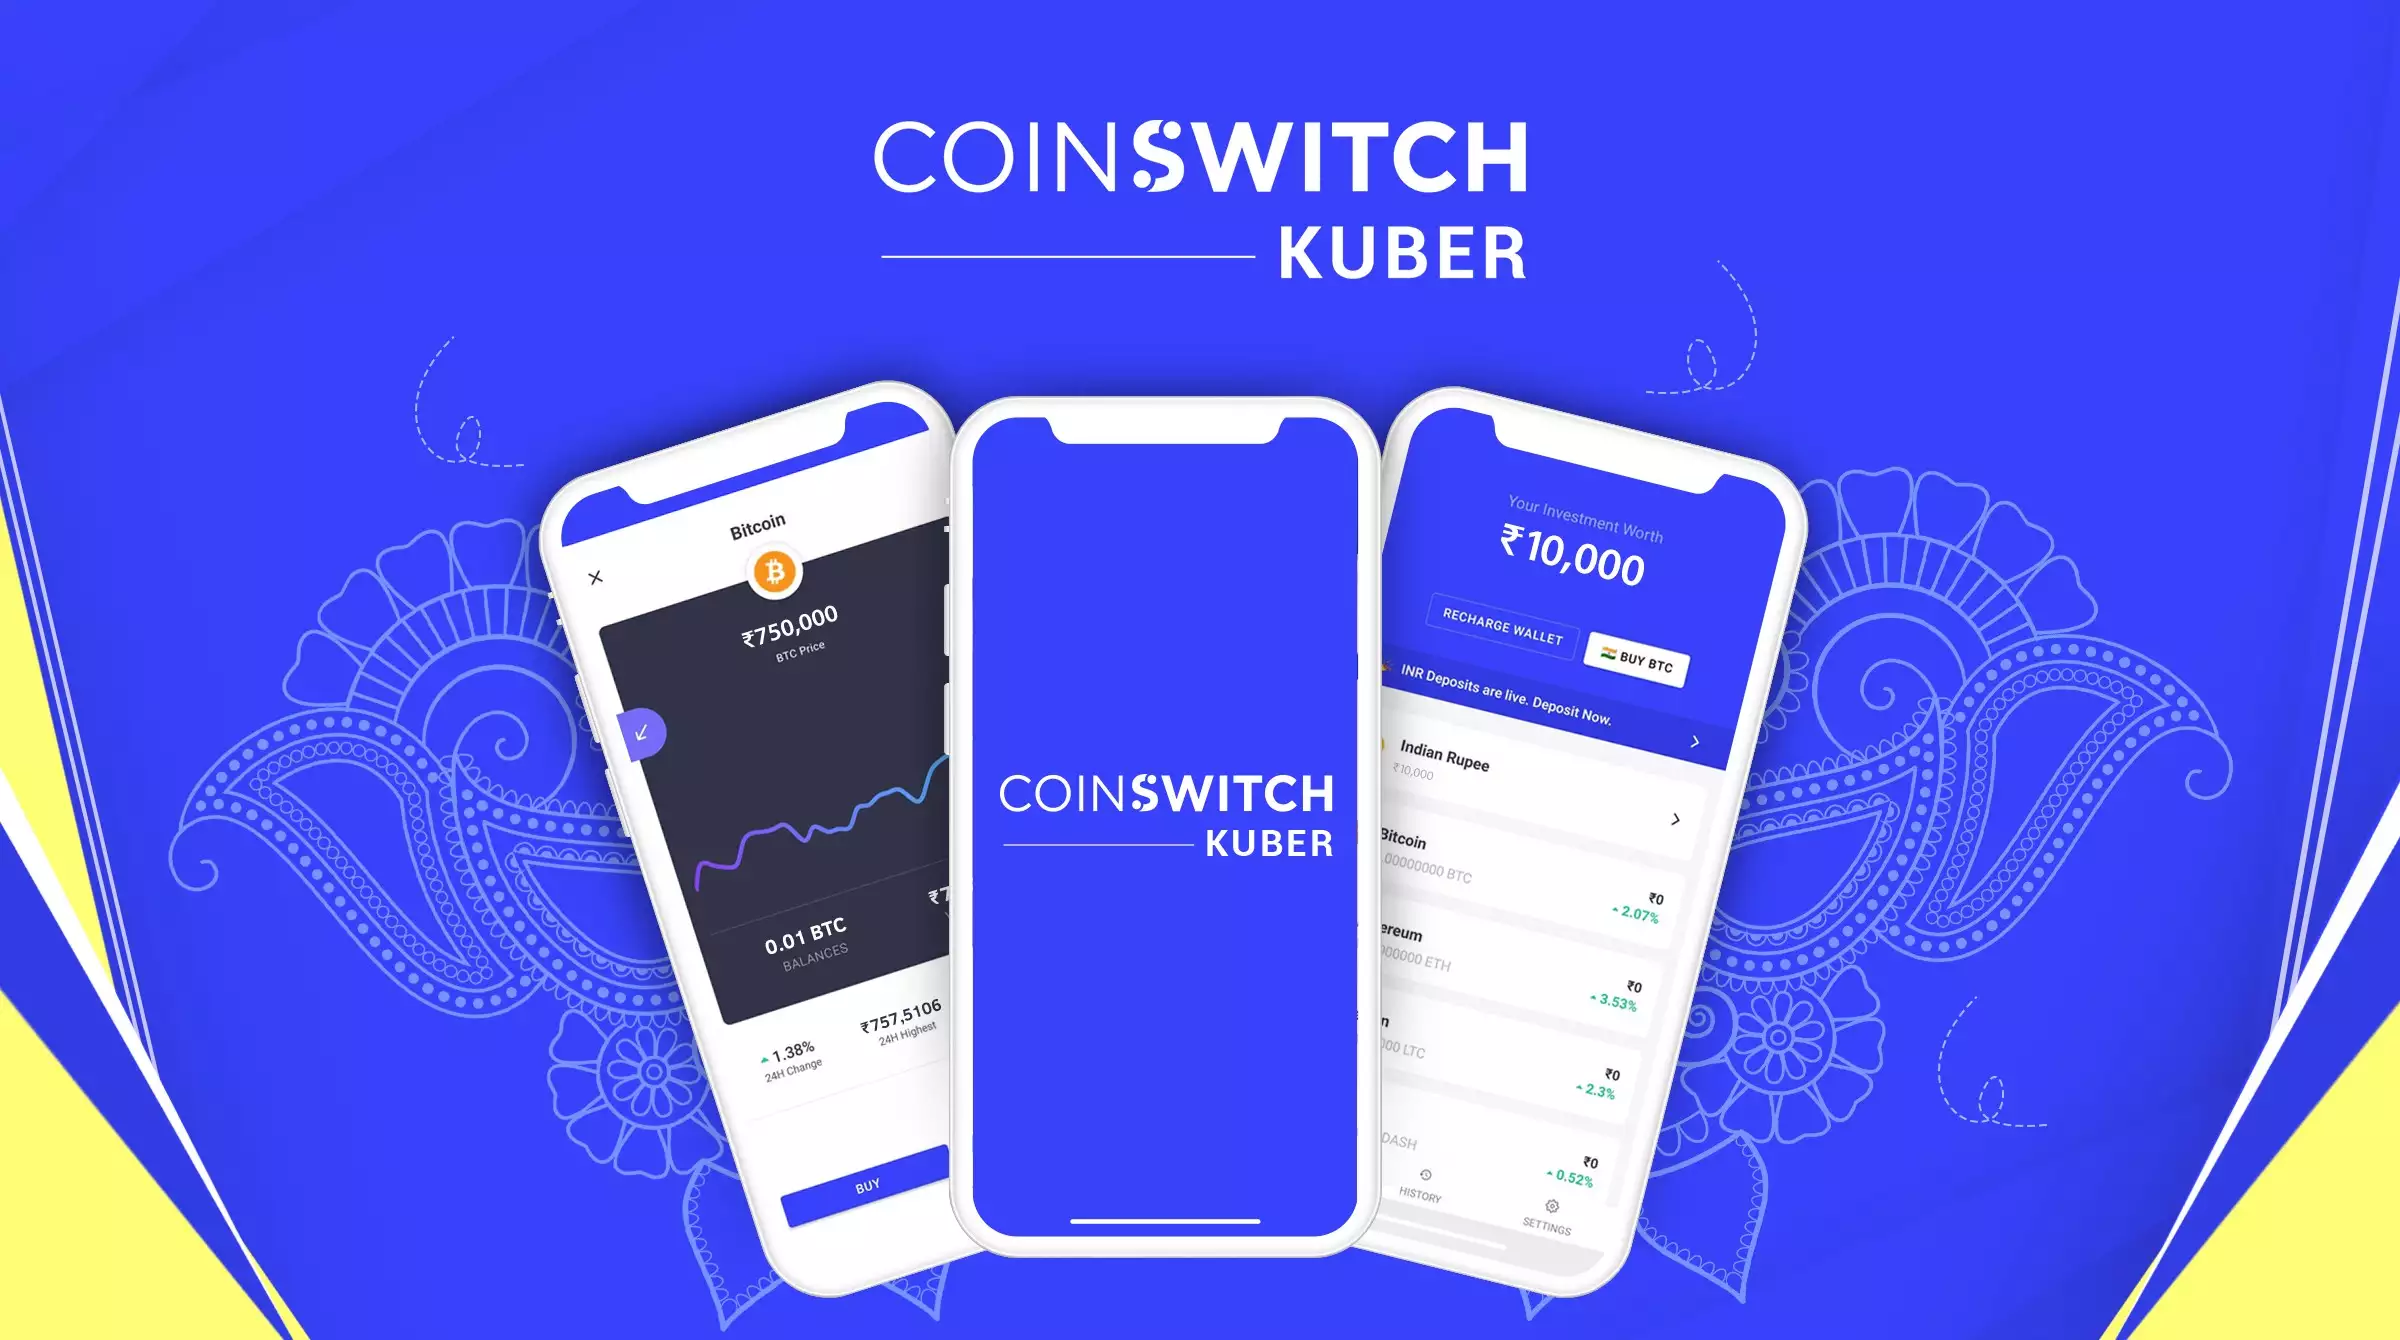 Il capo dell'app indiana CoinSwitch insiste su regole chiare per le monete digitali - tiger global makes its first crypto investment in india making coinswitch kuber worth half a billion dollars